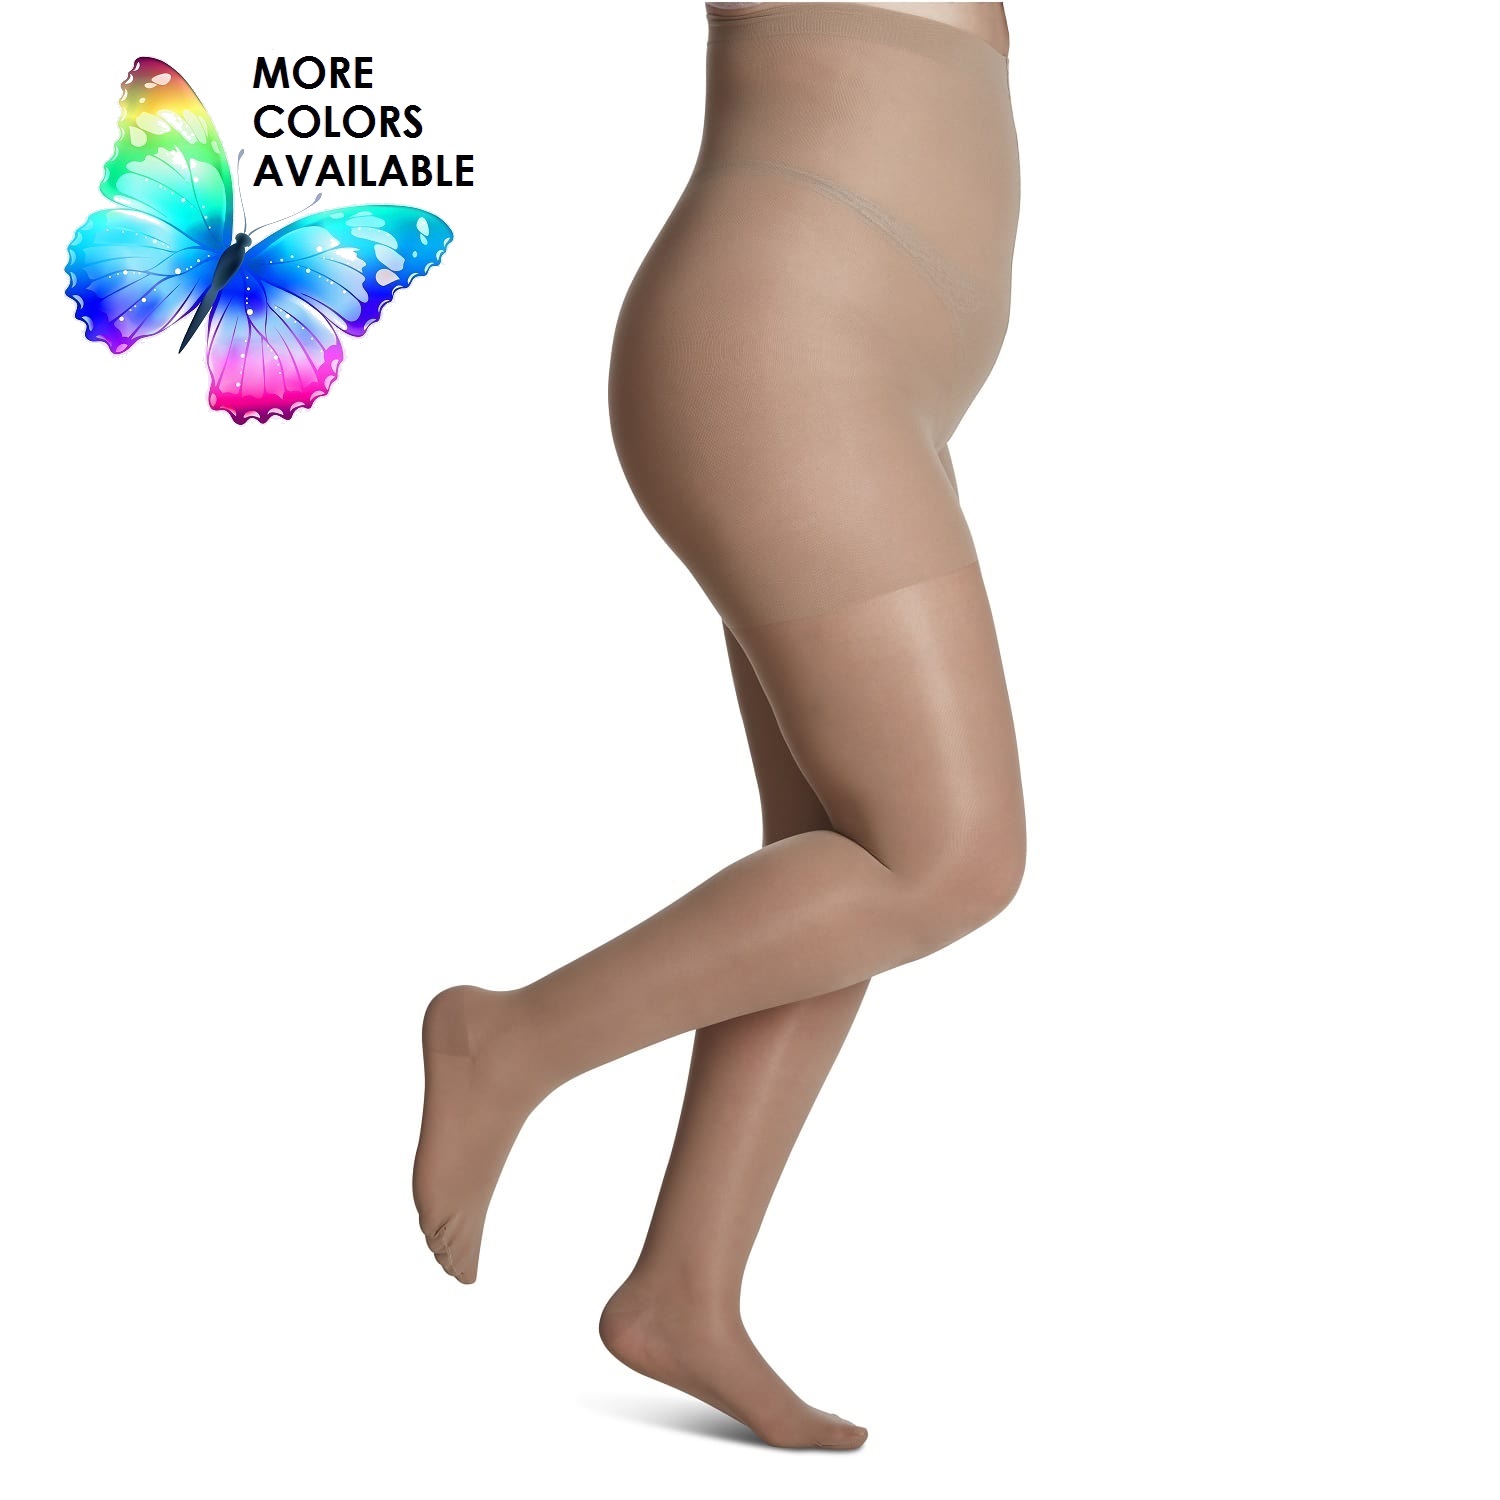 2 Colors Compression Pantyhose Legs Shaper Pants Slimming Tights